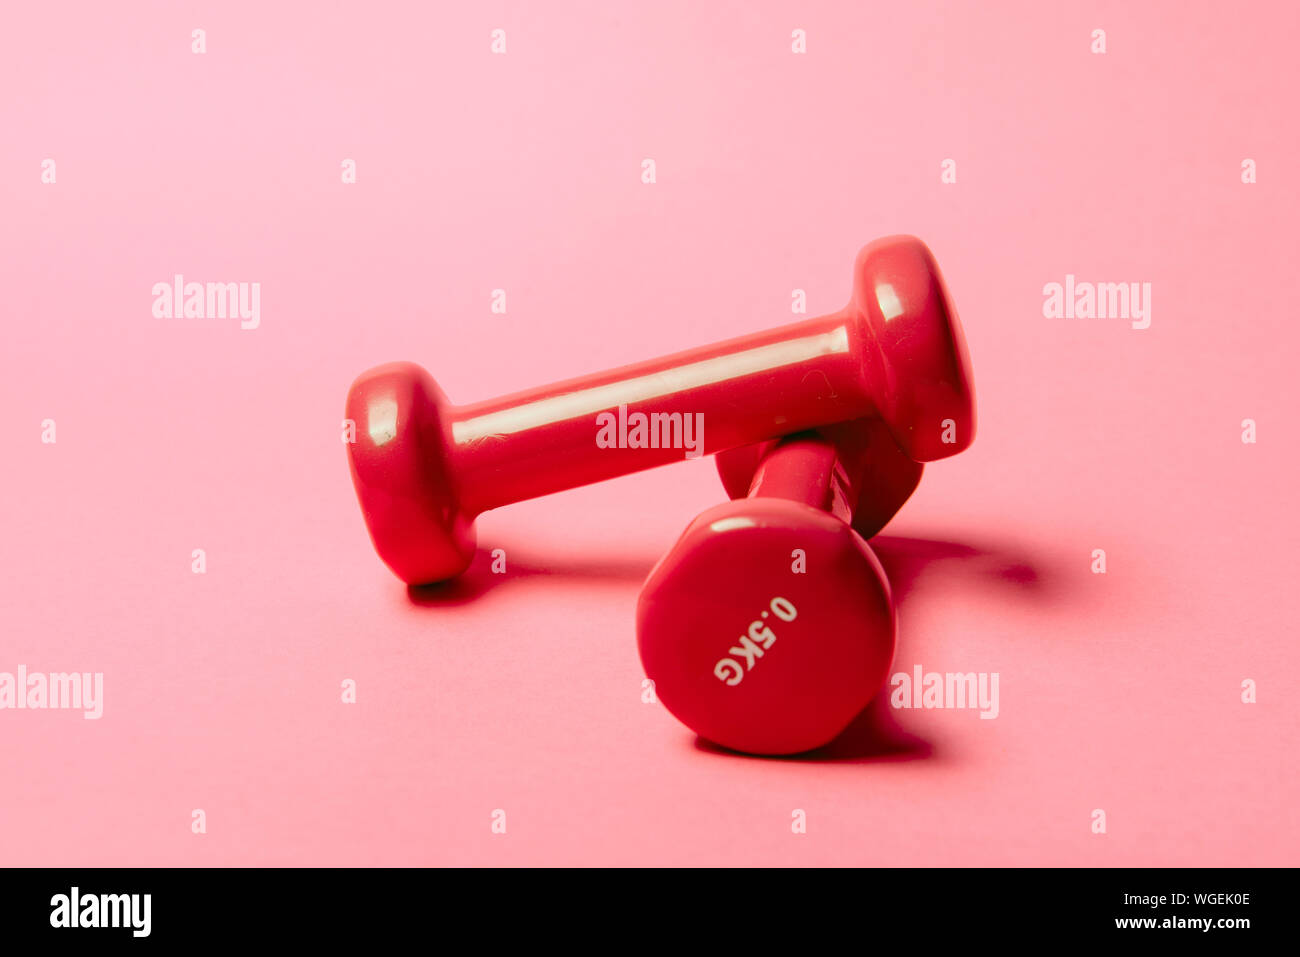 Pair of red 0.5 kg dumbbells on pink paper background. Stock Photo